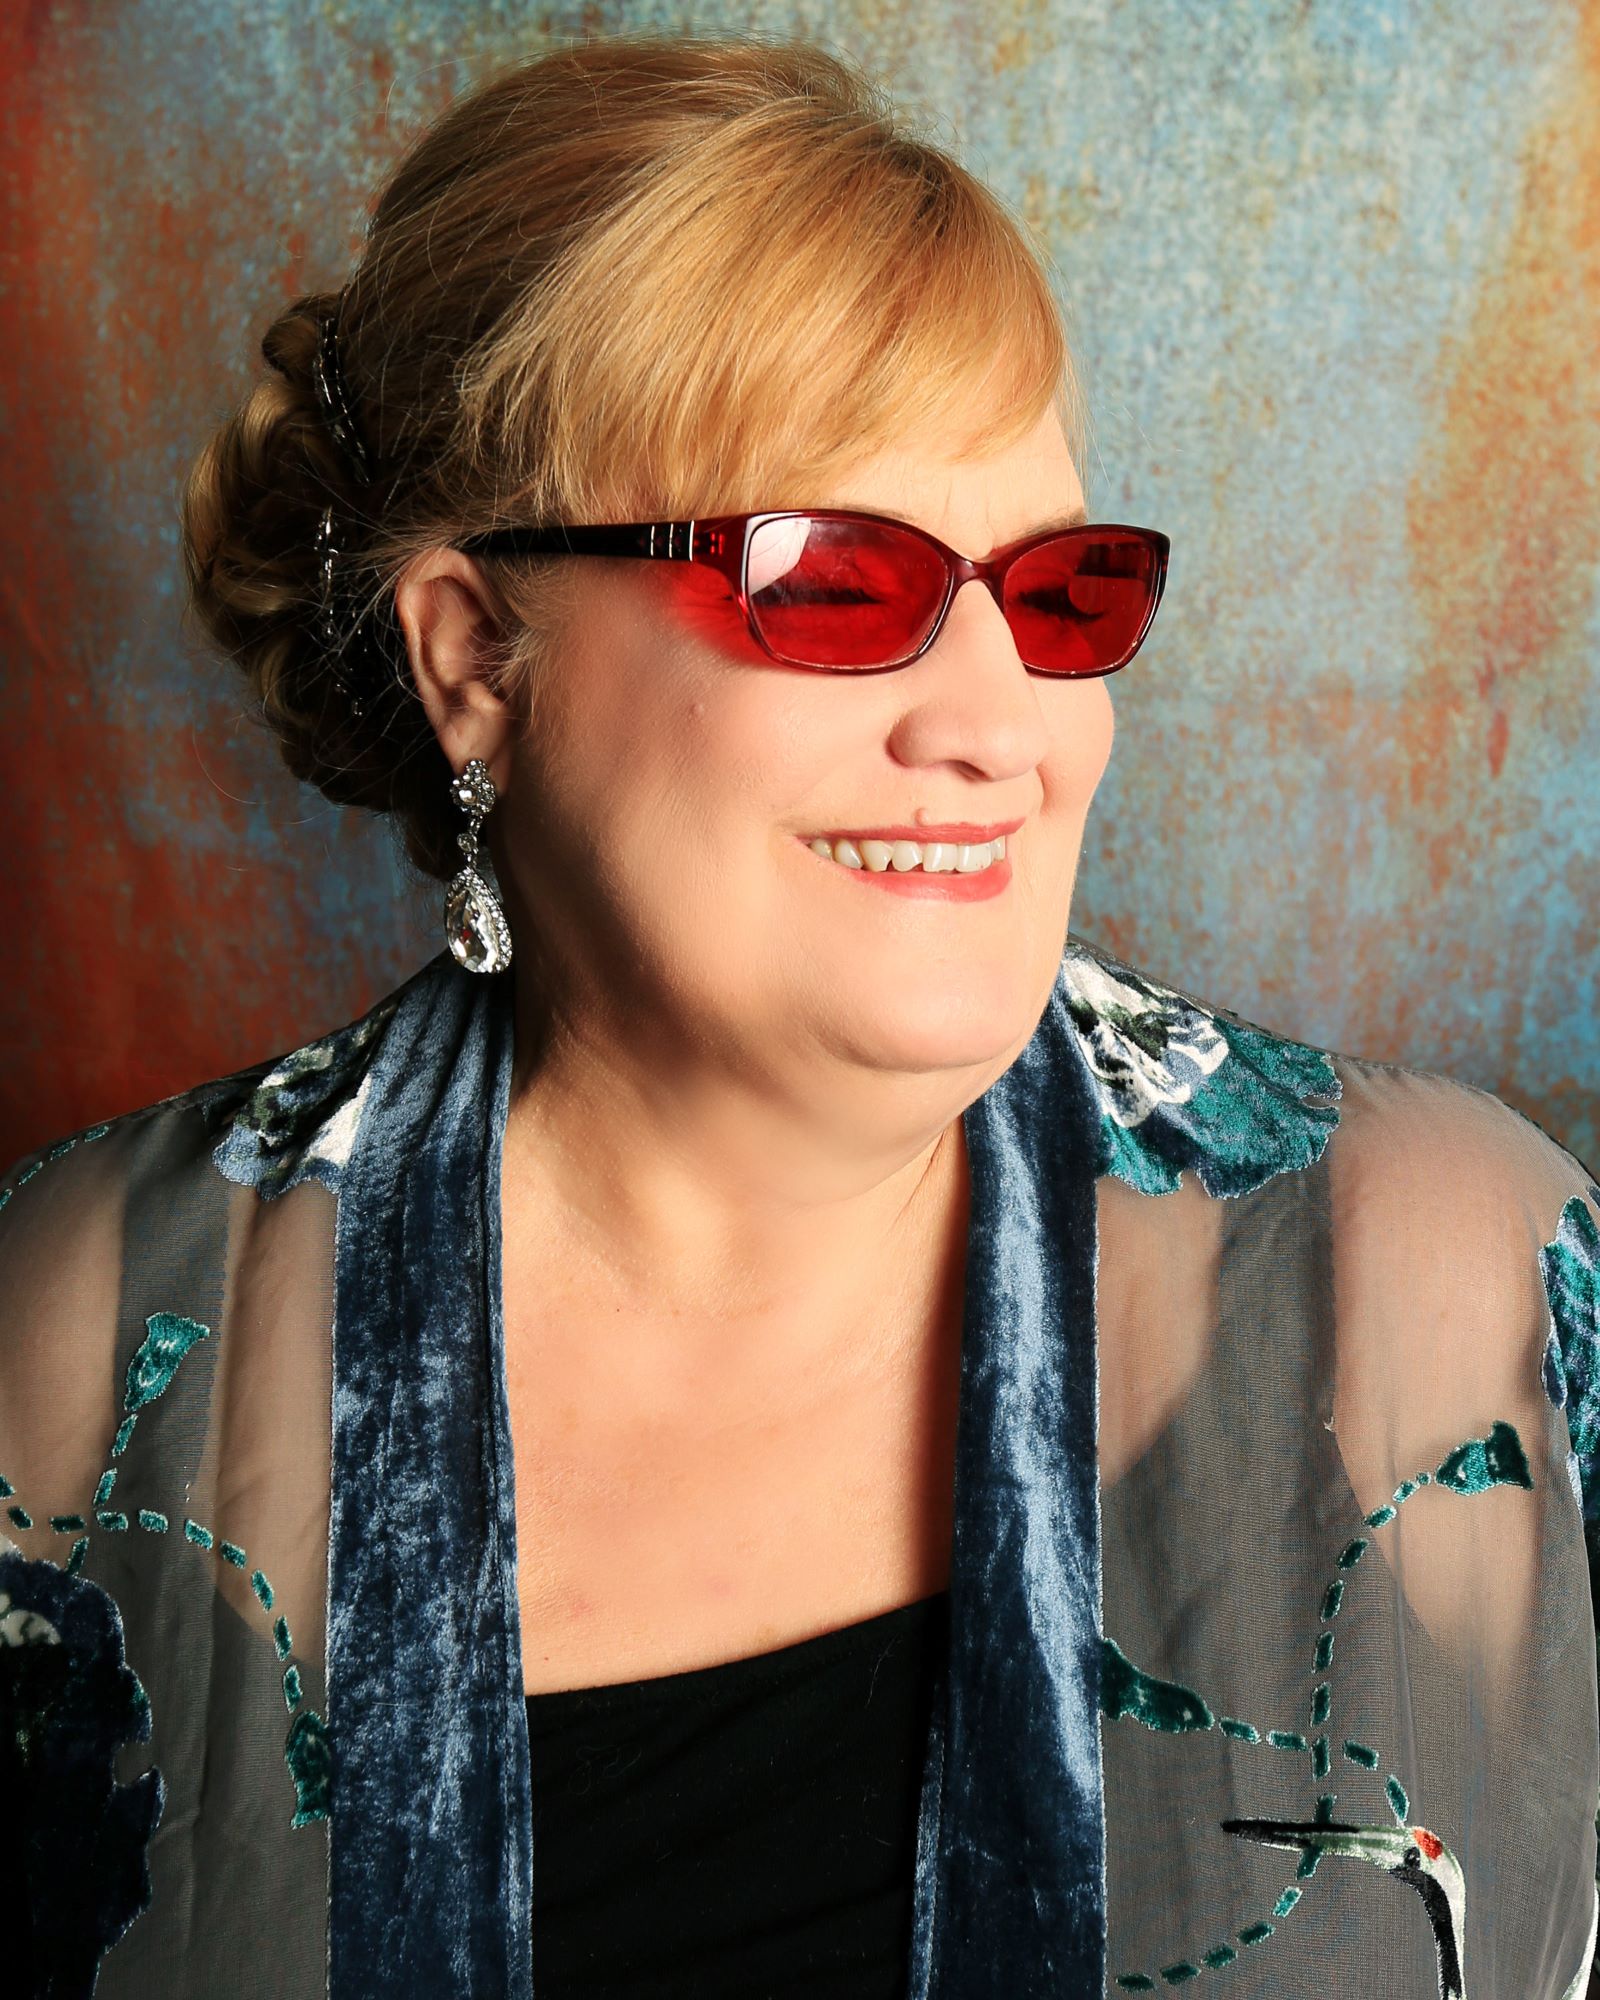 Alice smiling, wearing shades and fish-shaped earings. Dark blonde hair pulled back and wearing a blouse.